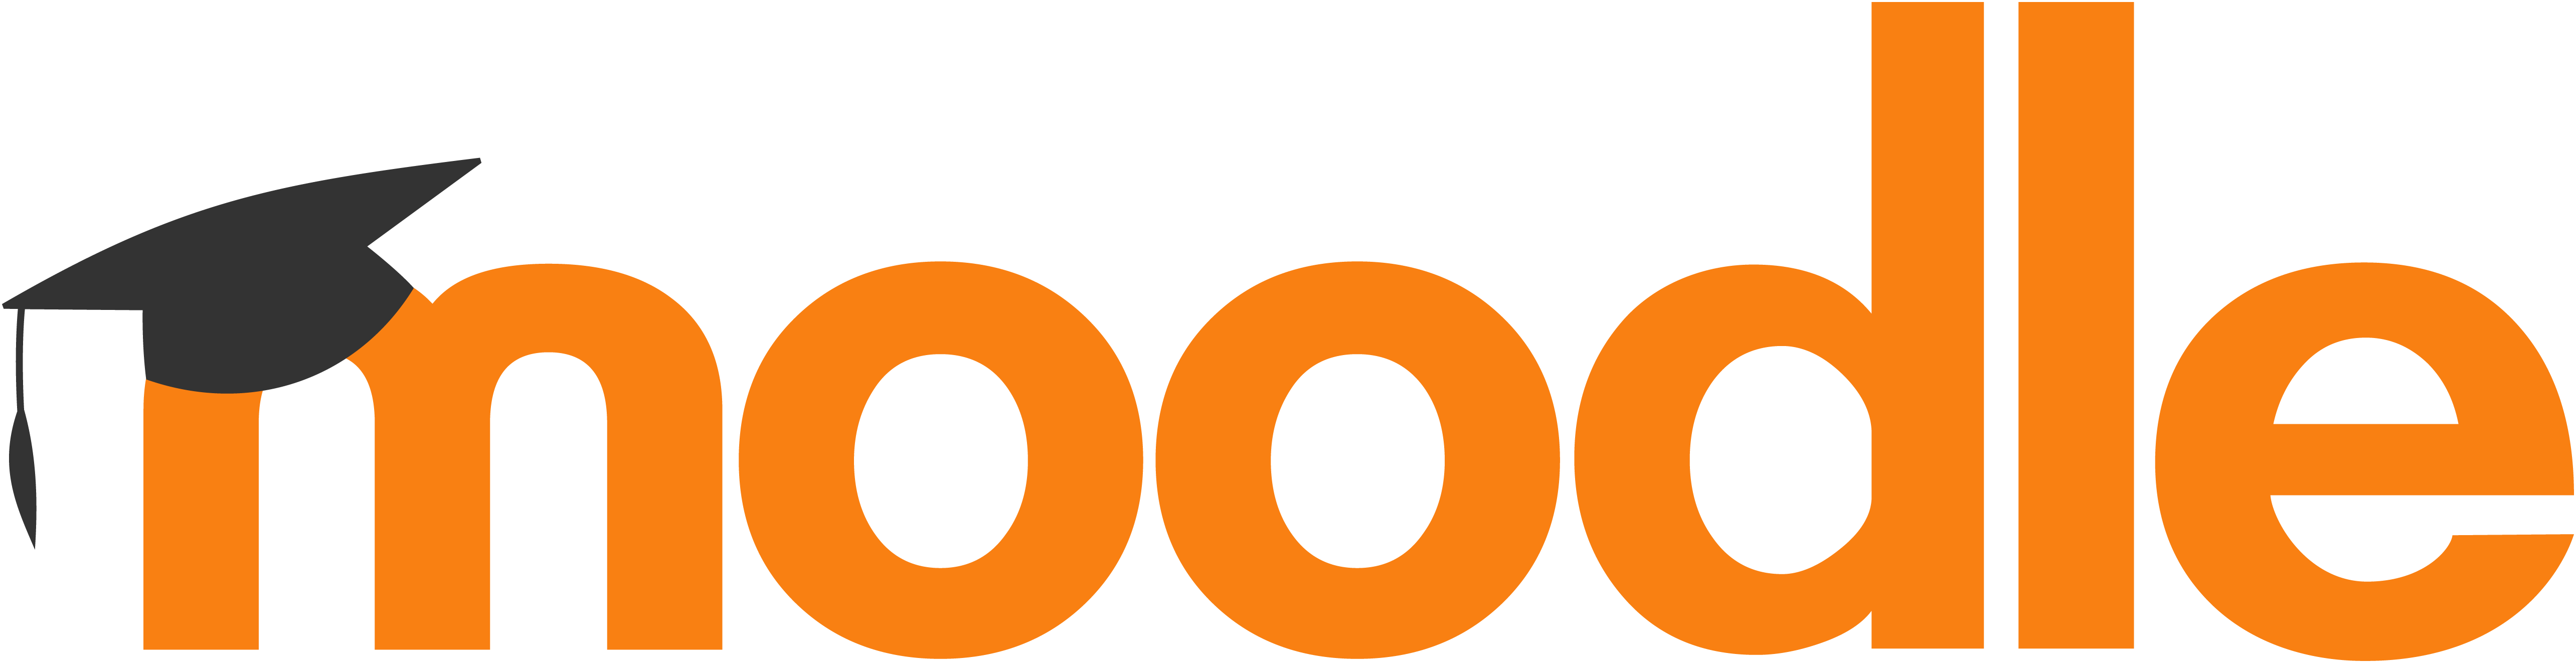 moodle_logo_small.png